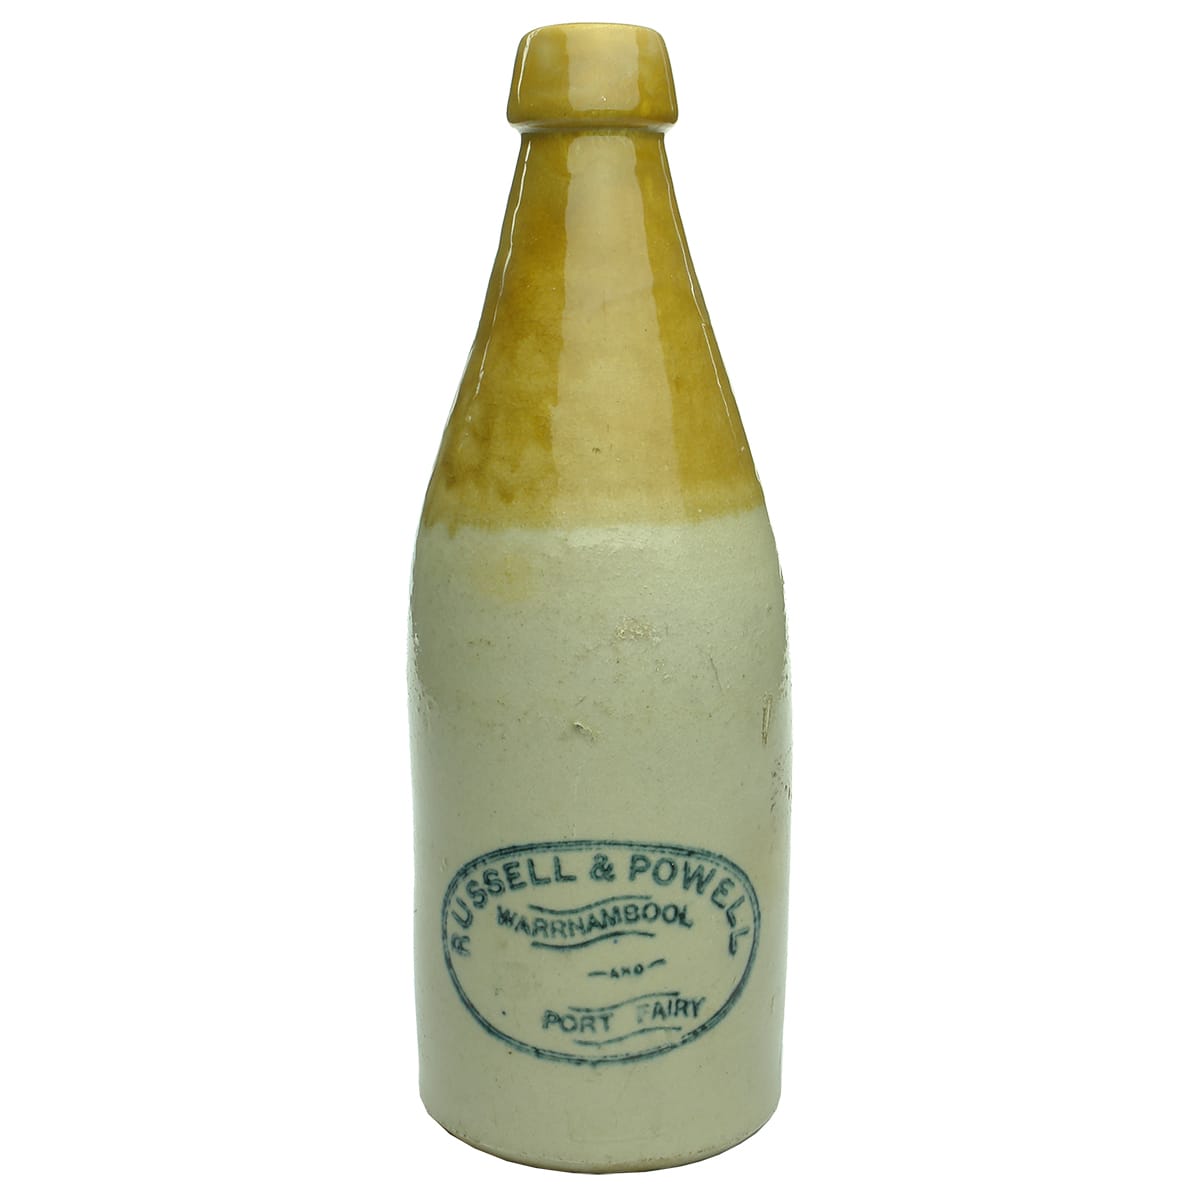 Ginger Beer.  Russell & Powell, Warrnambool and Port Fairy.  Champagne.  Internal thread.  Tan top.  26 oz.